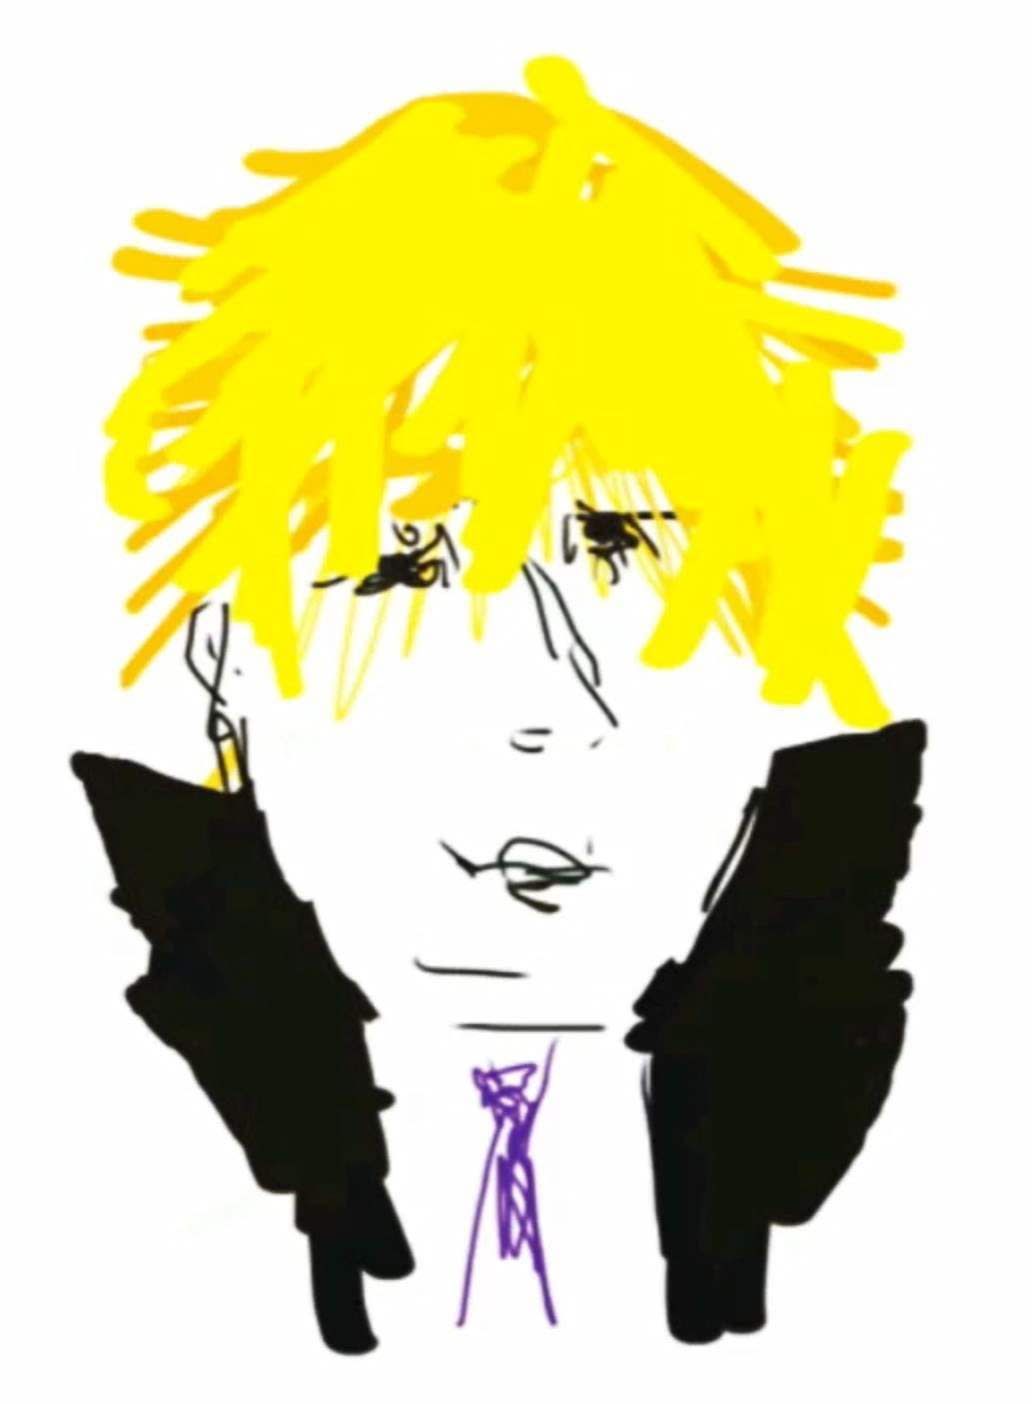 Joanna Ciechanowska (1950-) Boris Johnson 2013 Digital drawing 29.7 x 21 cm Artist's collection To see and discover more about this artist click here